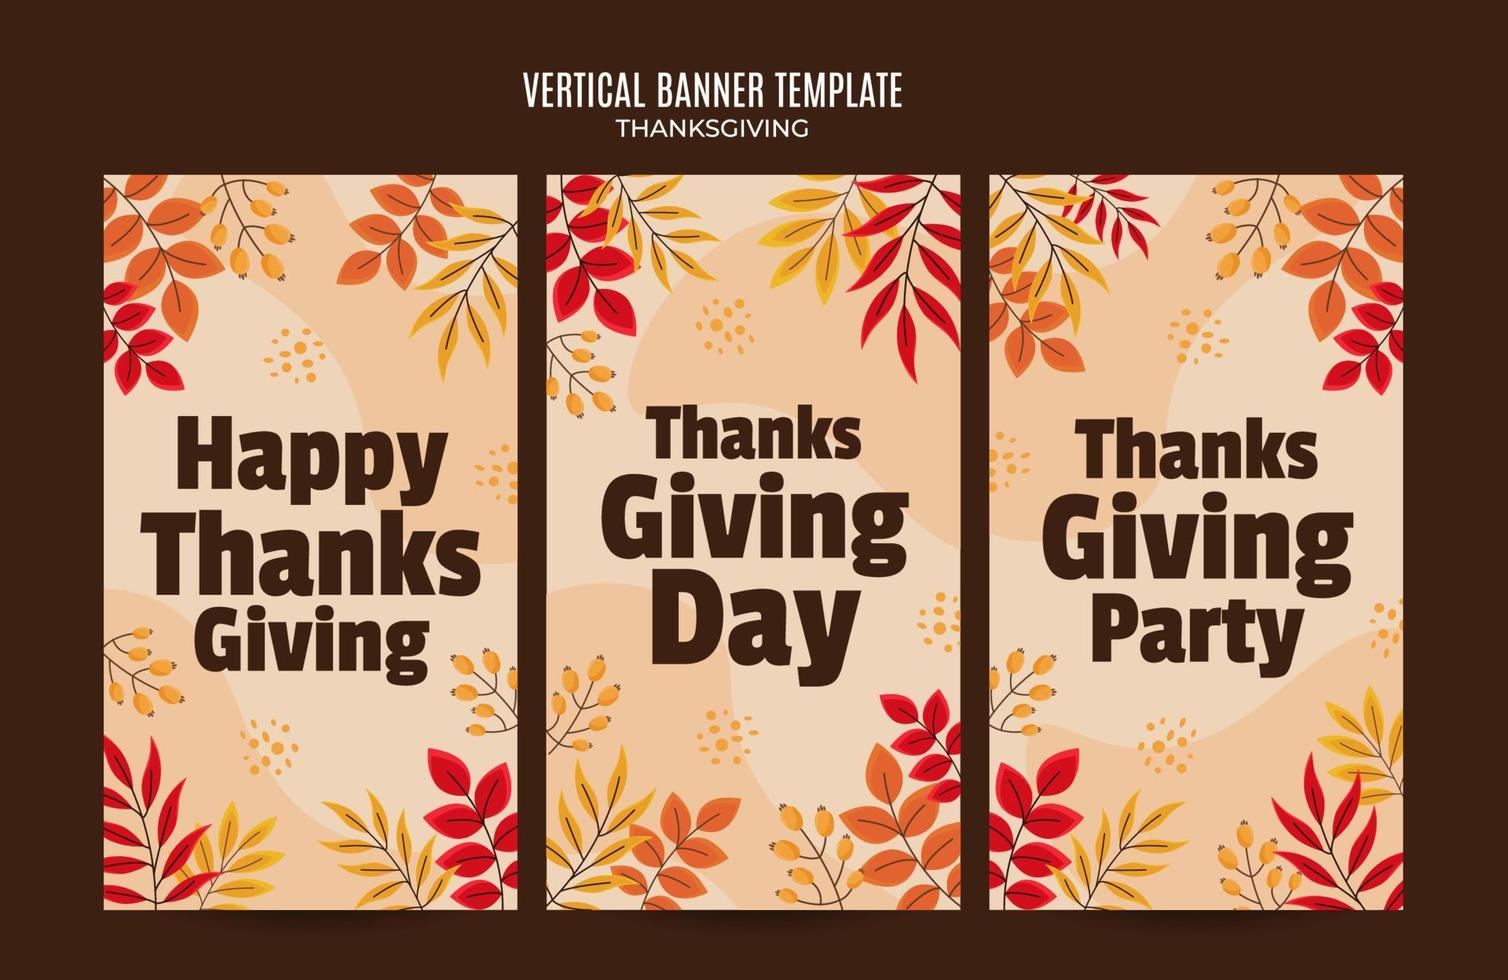 thanksgiving design for advertising, banners, leaflets and flyers vector